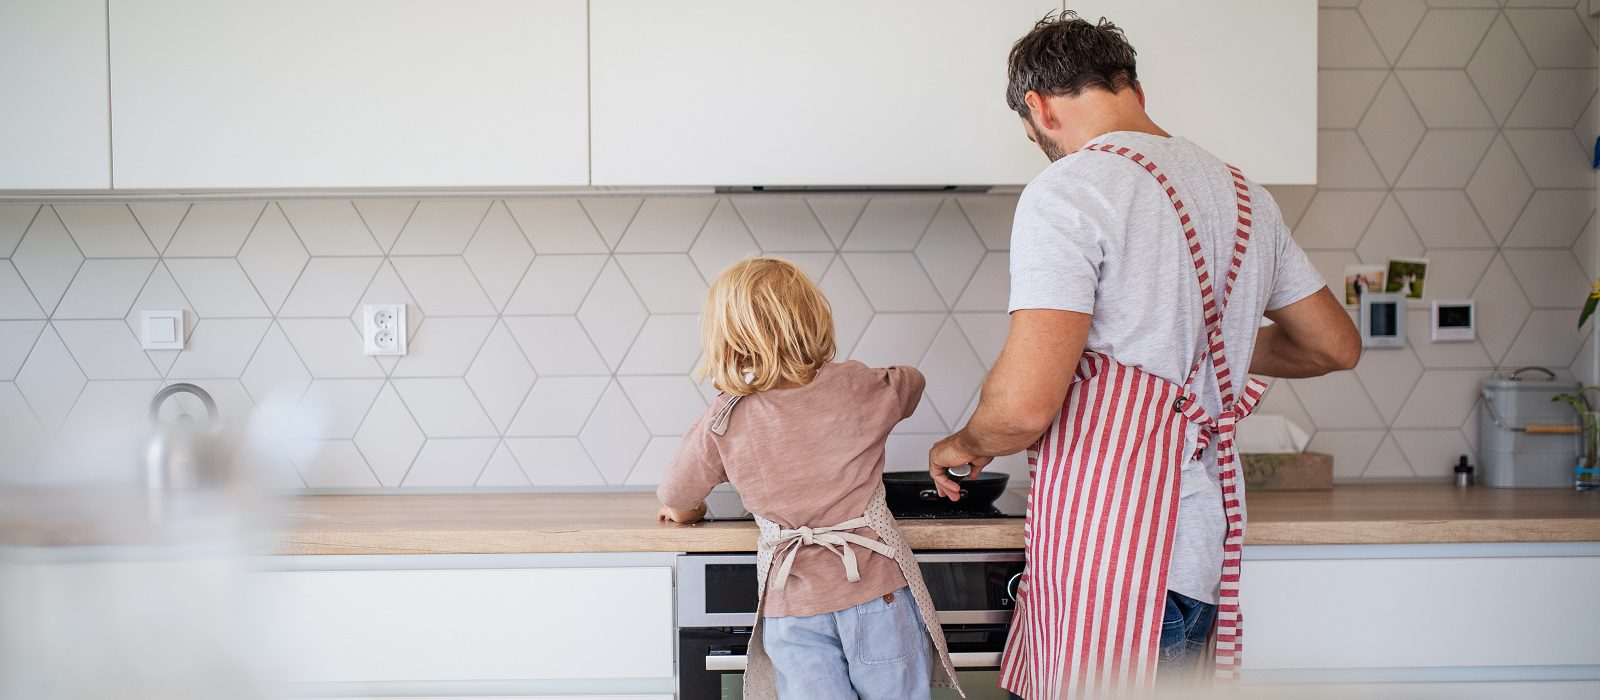 A rear view of small boy helping father indoors in kitchen with making pancakes.